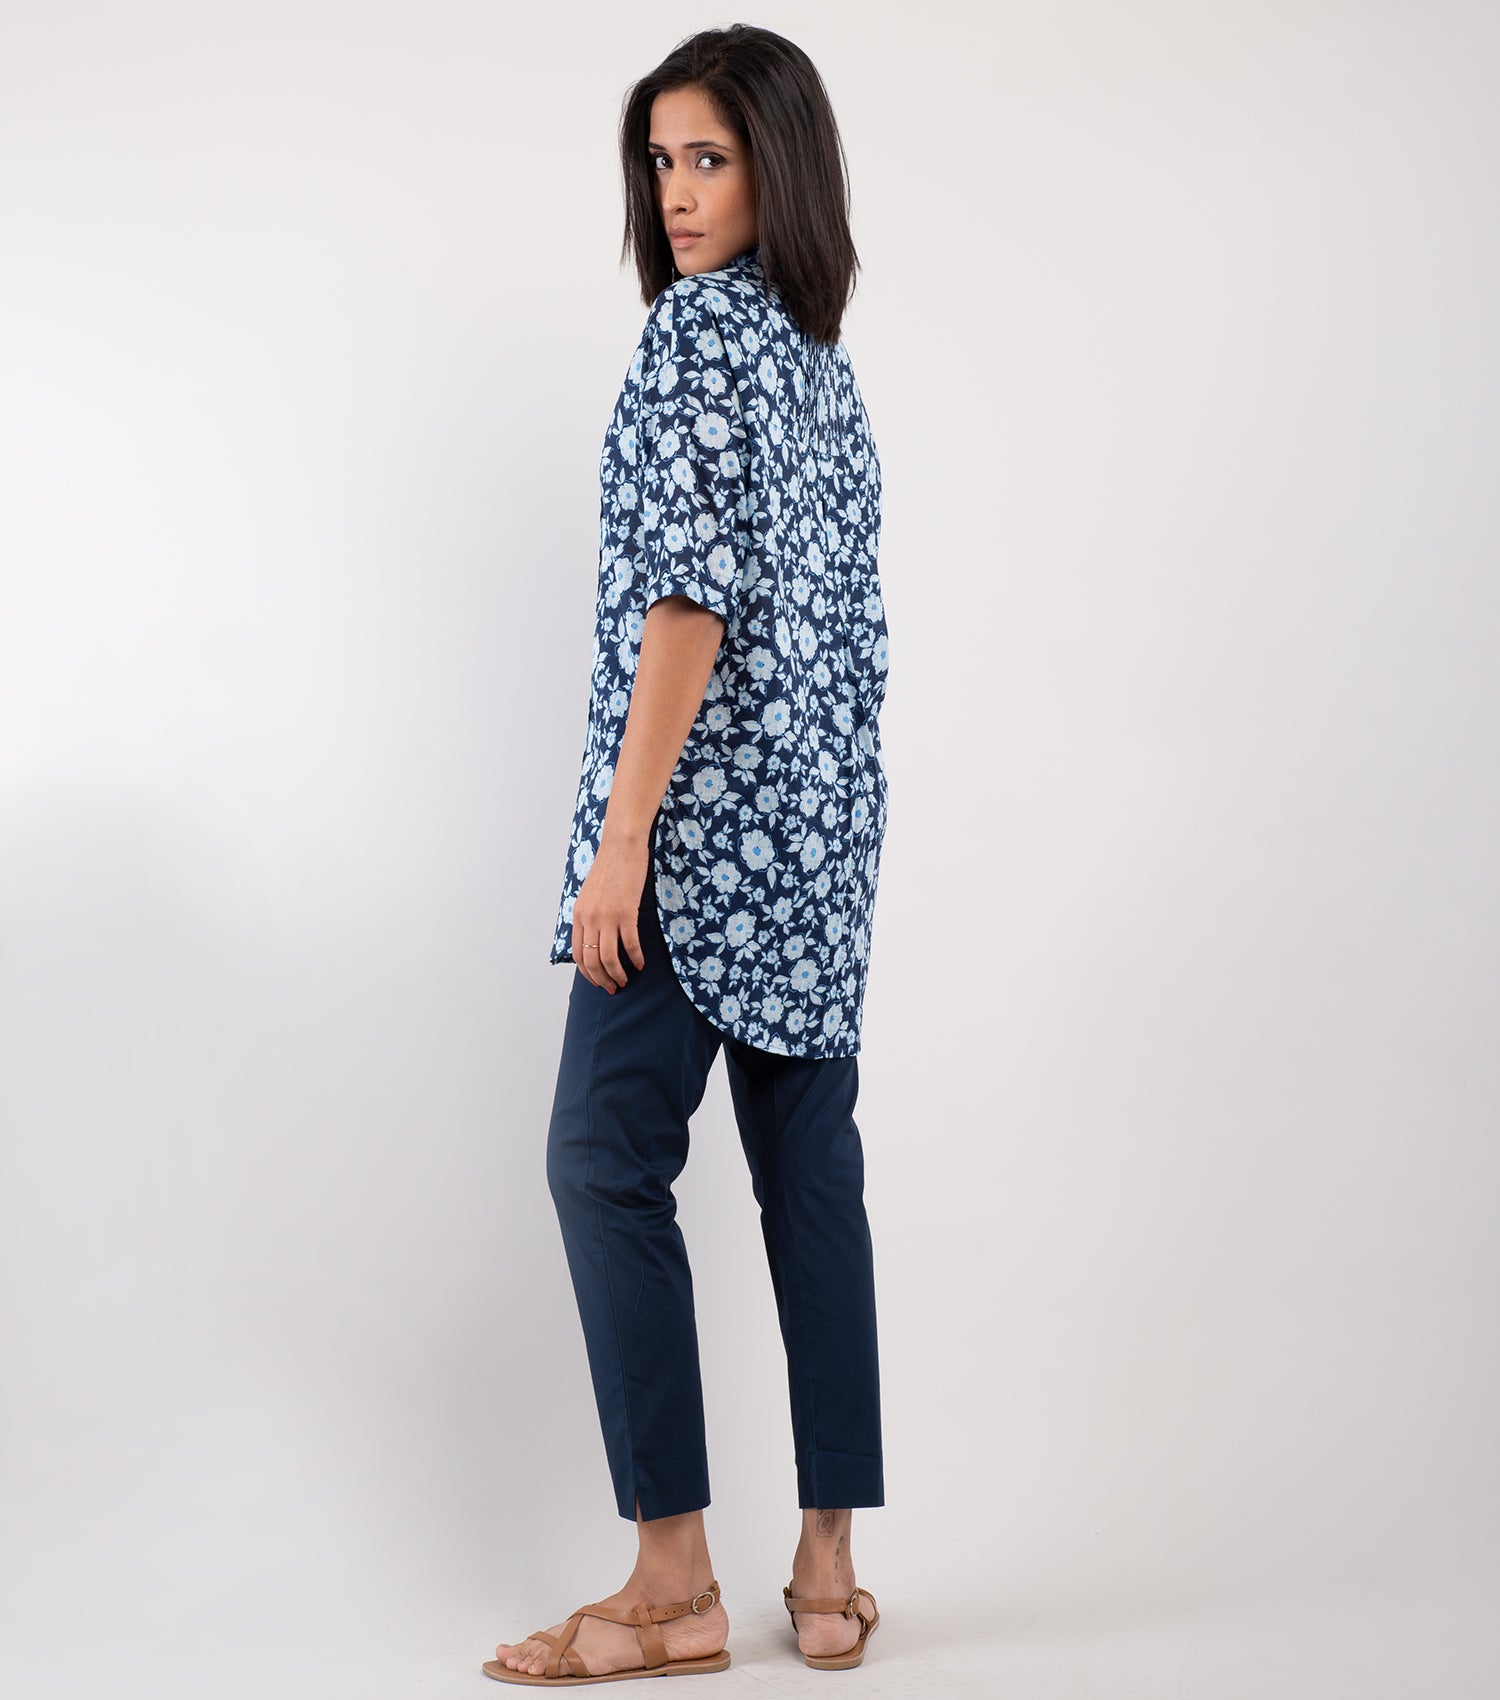 Blue Printed Cotton Top